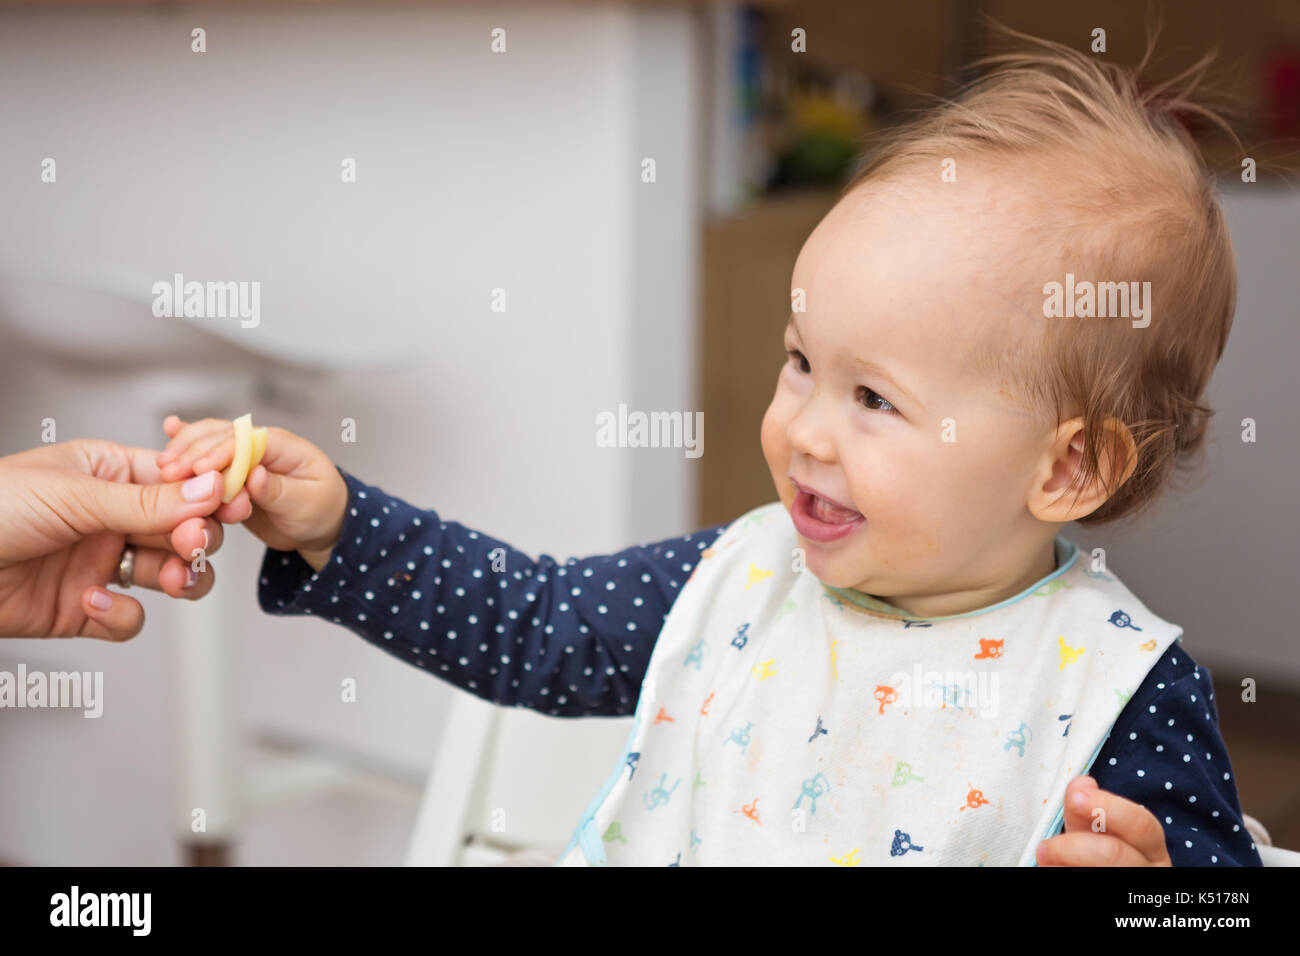 Diet Chart For 1 Year Old Baby Girl